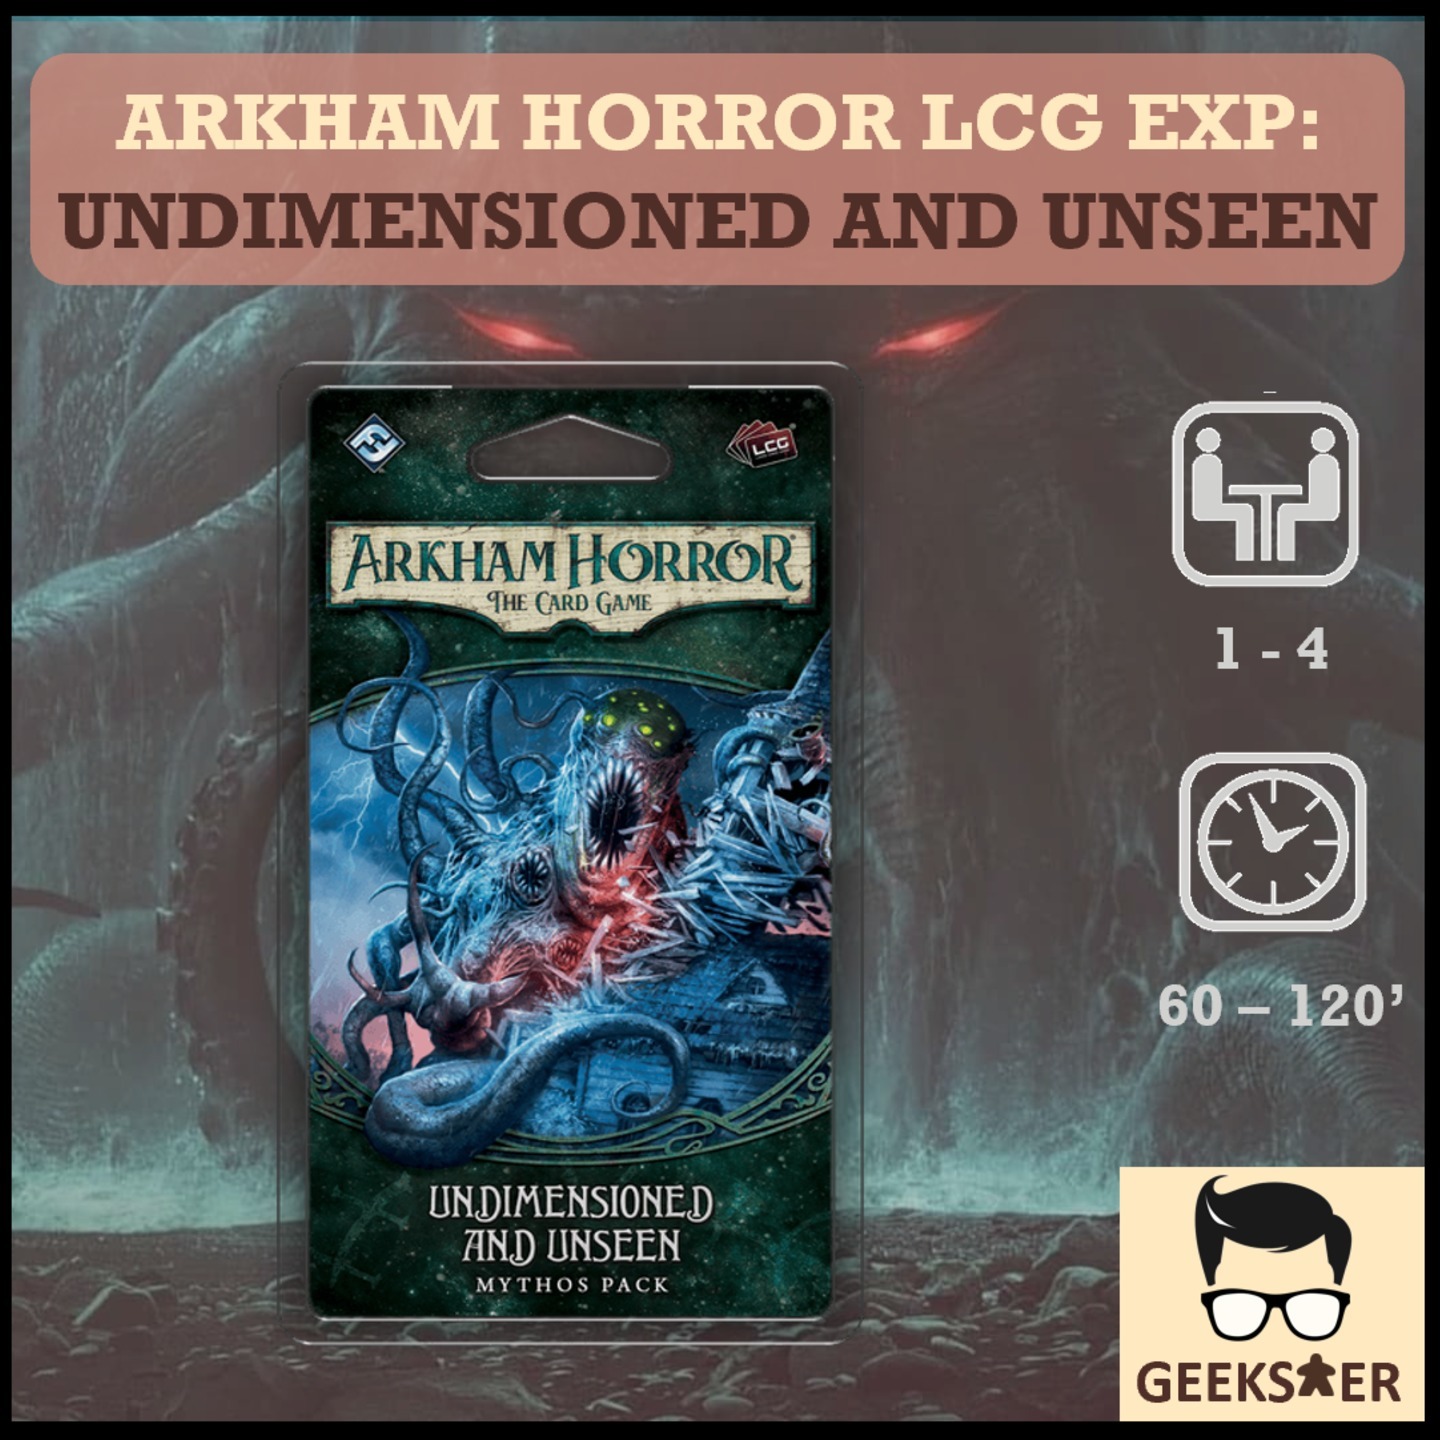 Arkham Horror LCG Exp Undimensioned and Unseen